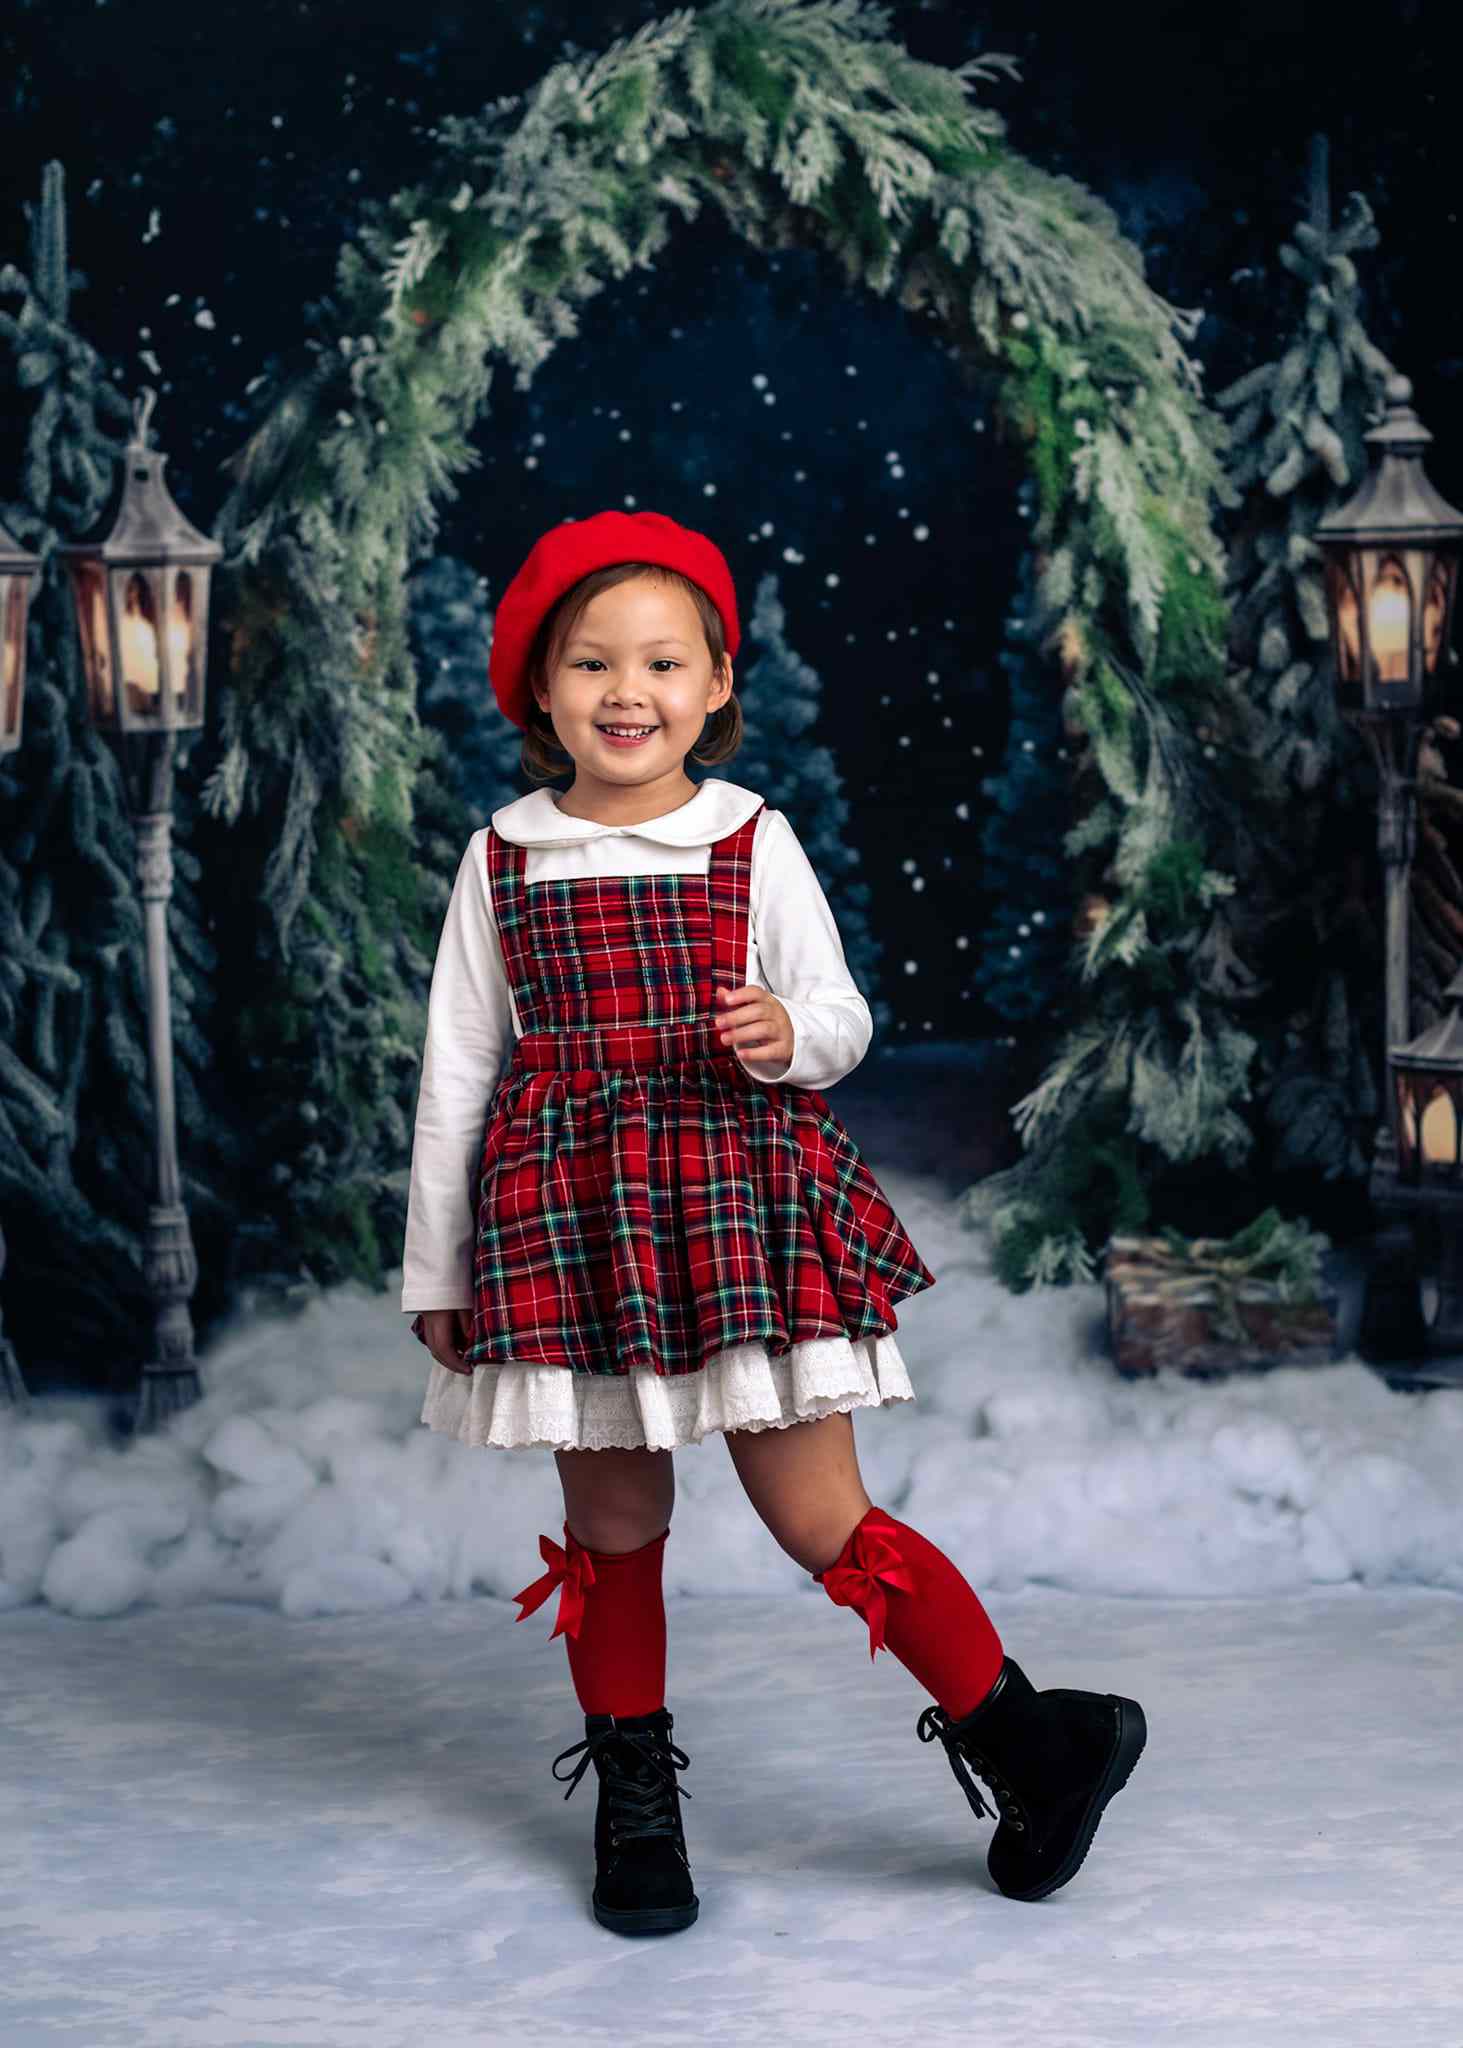 Kate Christmas Outdoor Arch Tree Night Backdrop for Photography